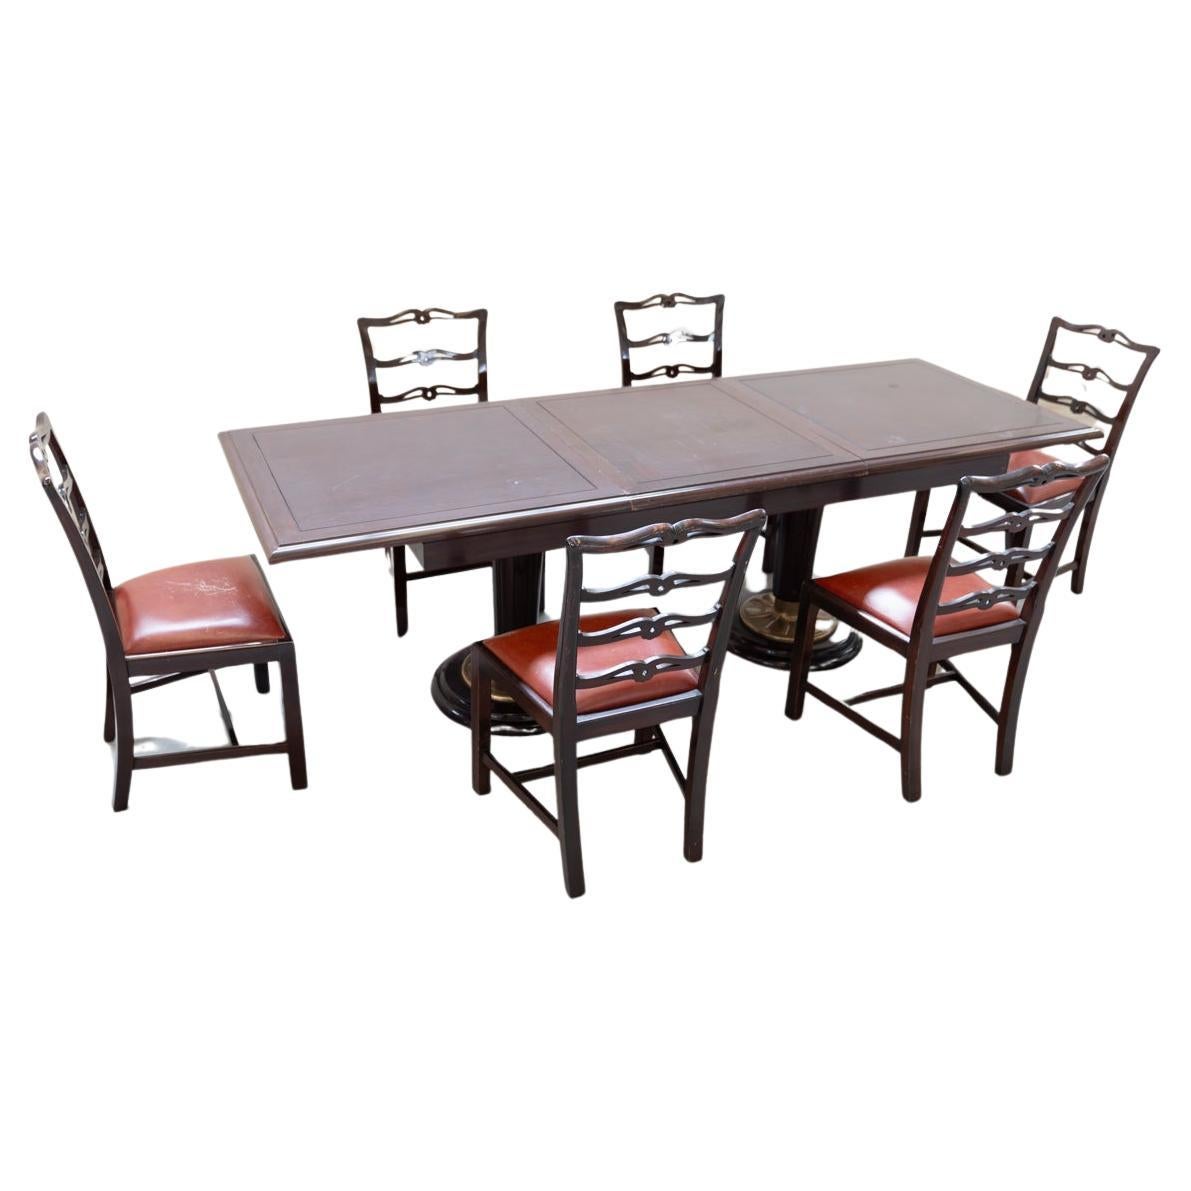 Table with 6 chairs naval style 1970 - 1980 For Sale